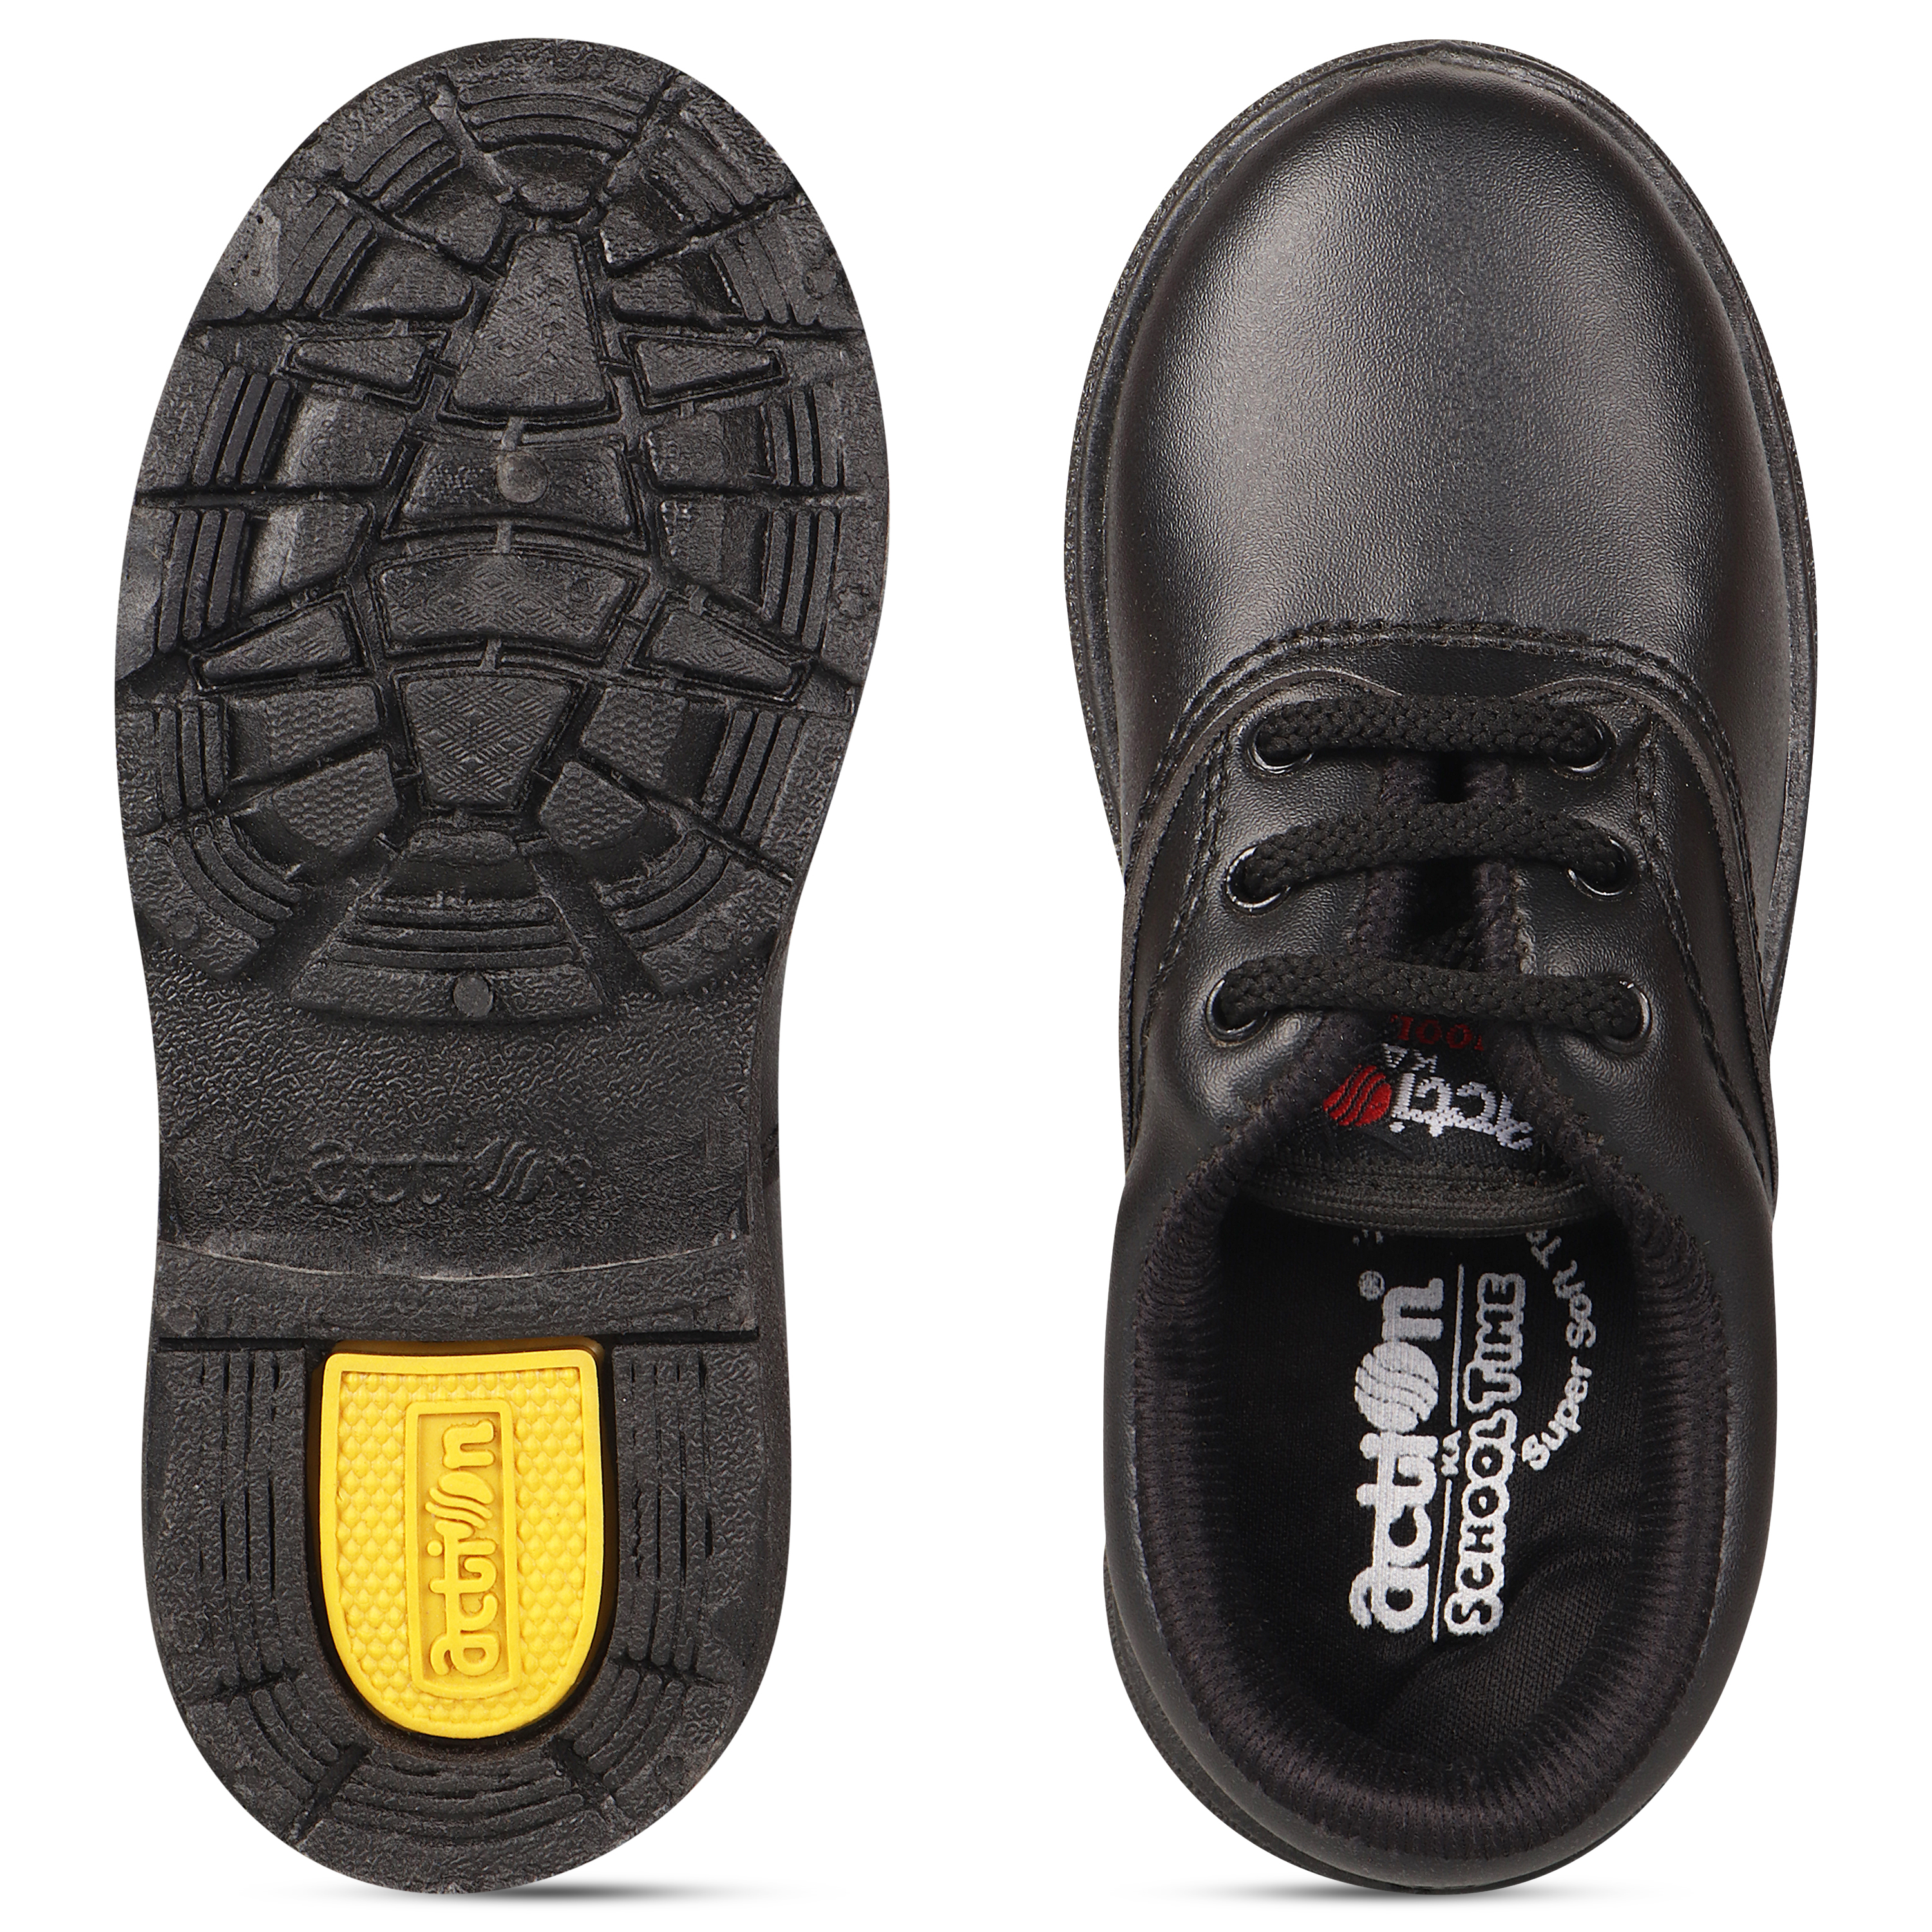 Action Campus School Shoes Girls Black